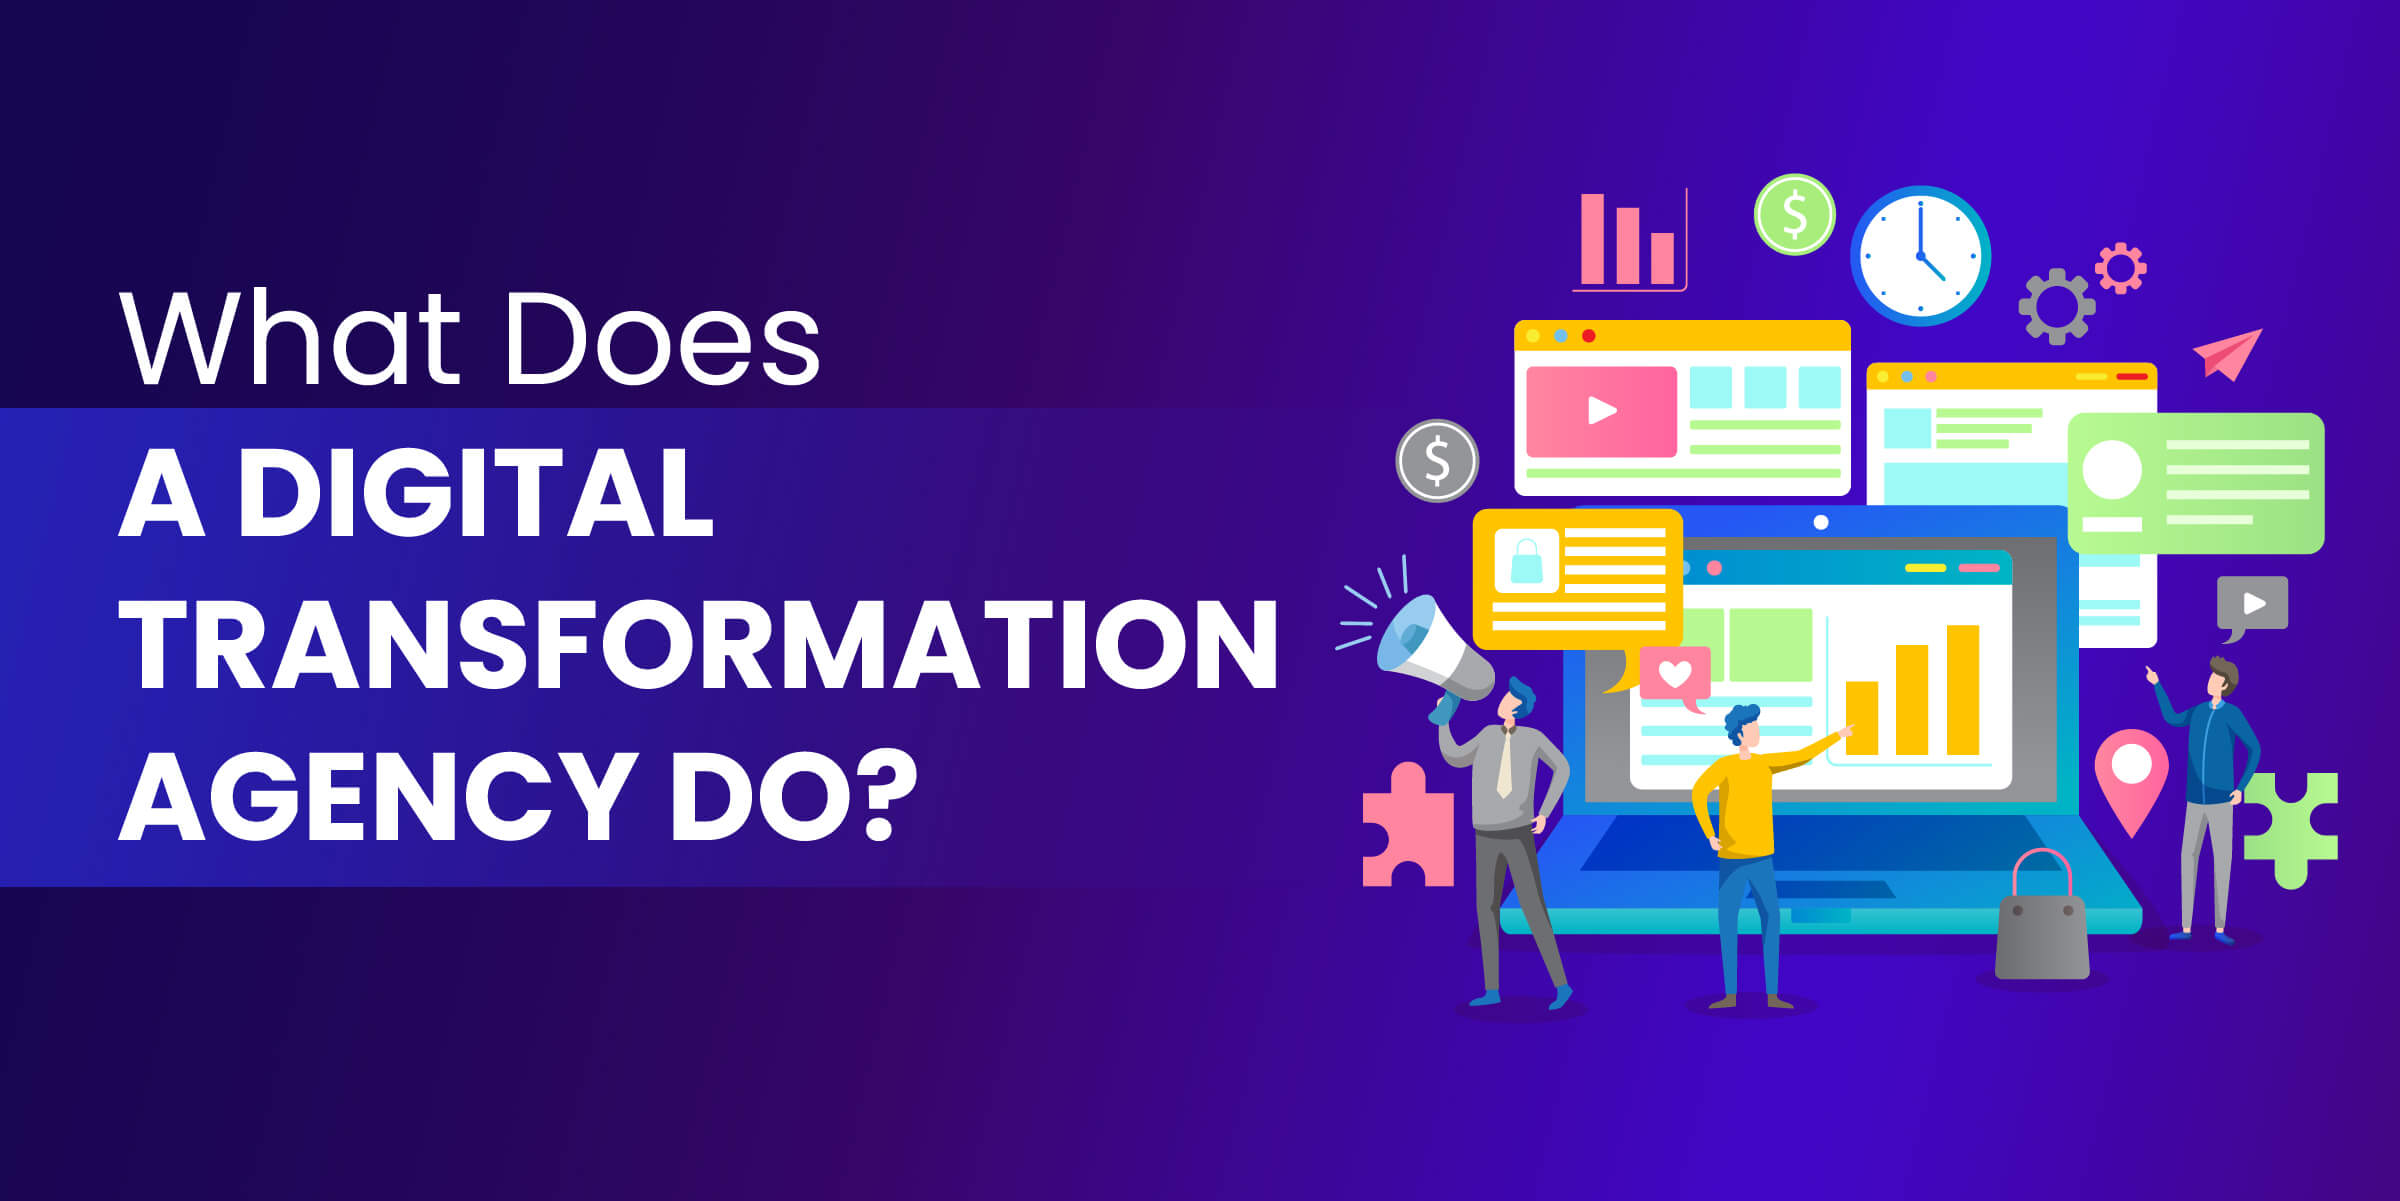 What Does a Digital Transformation Agency Do